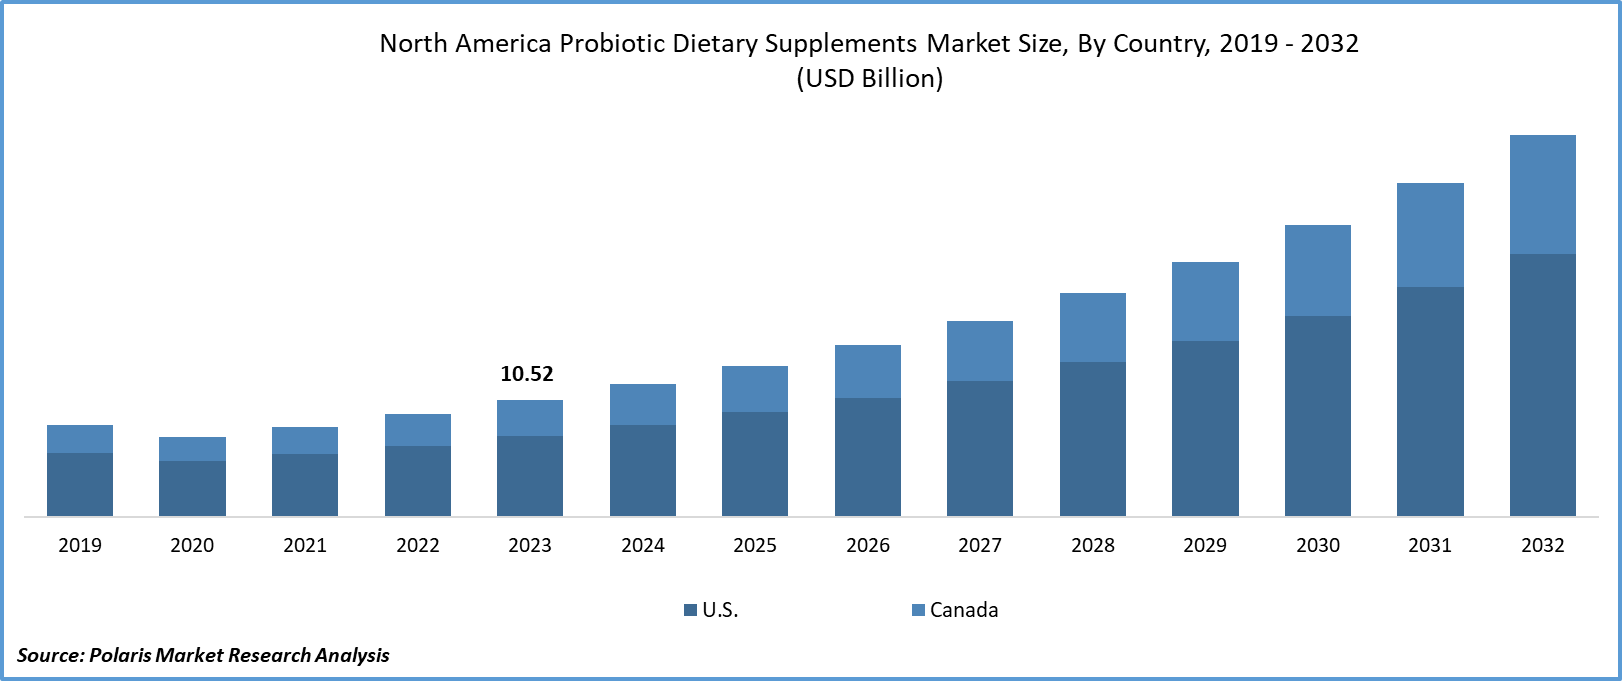 North America Probiotic Dietary Supplements Market Size